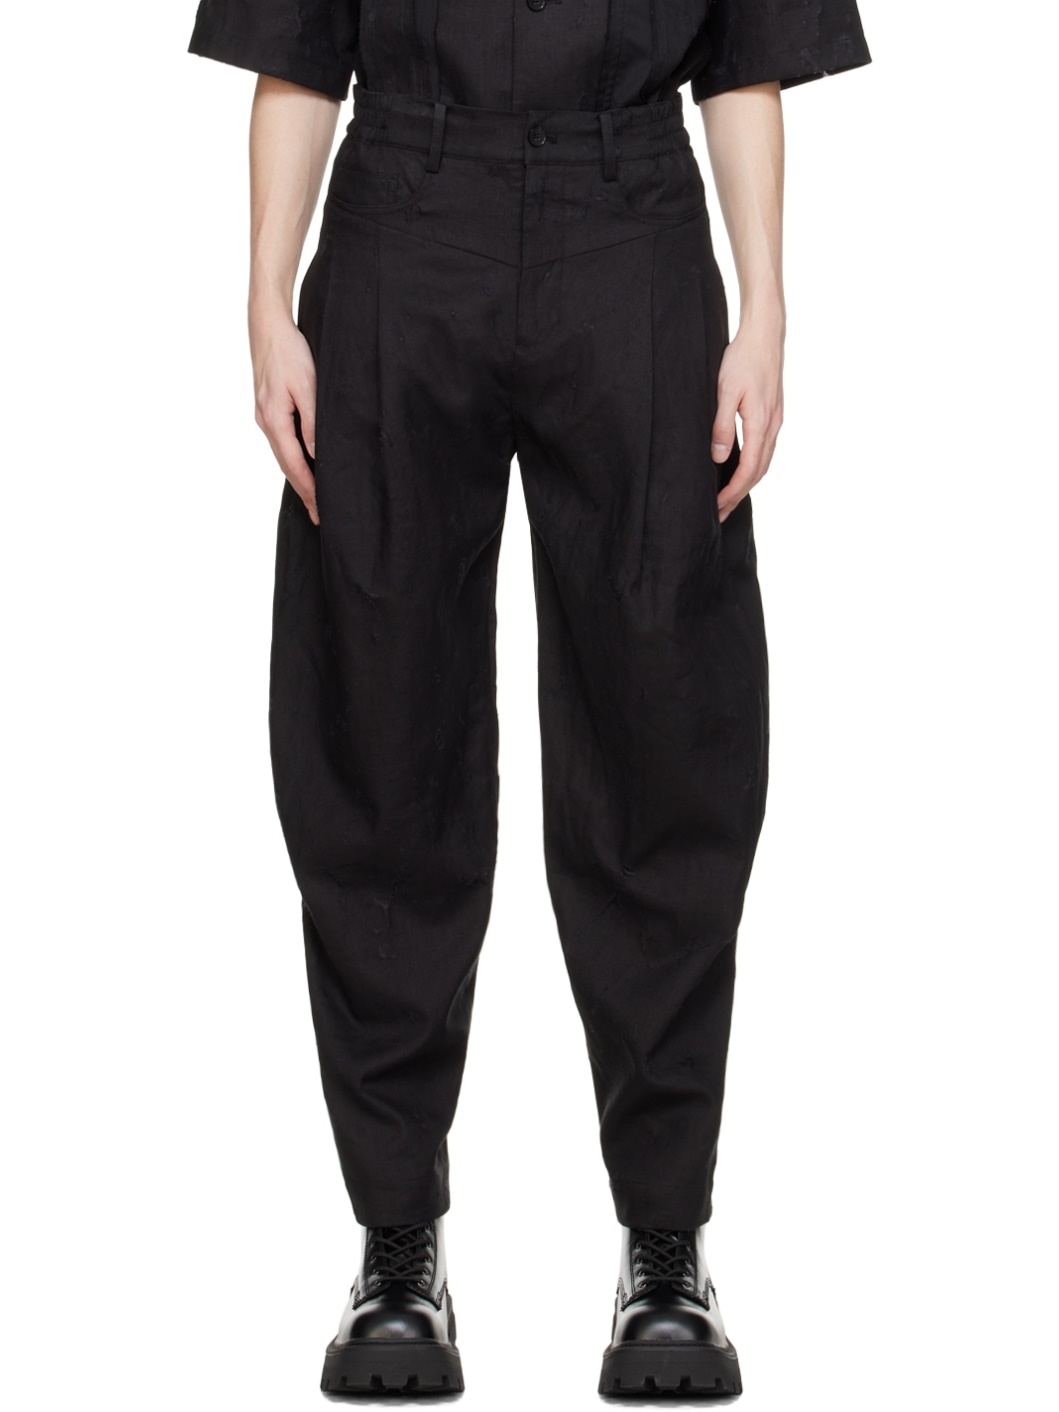 Black Distressed Trousers - 1